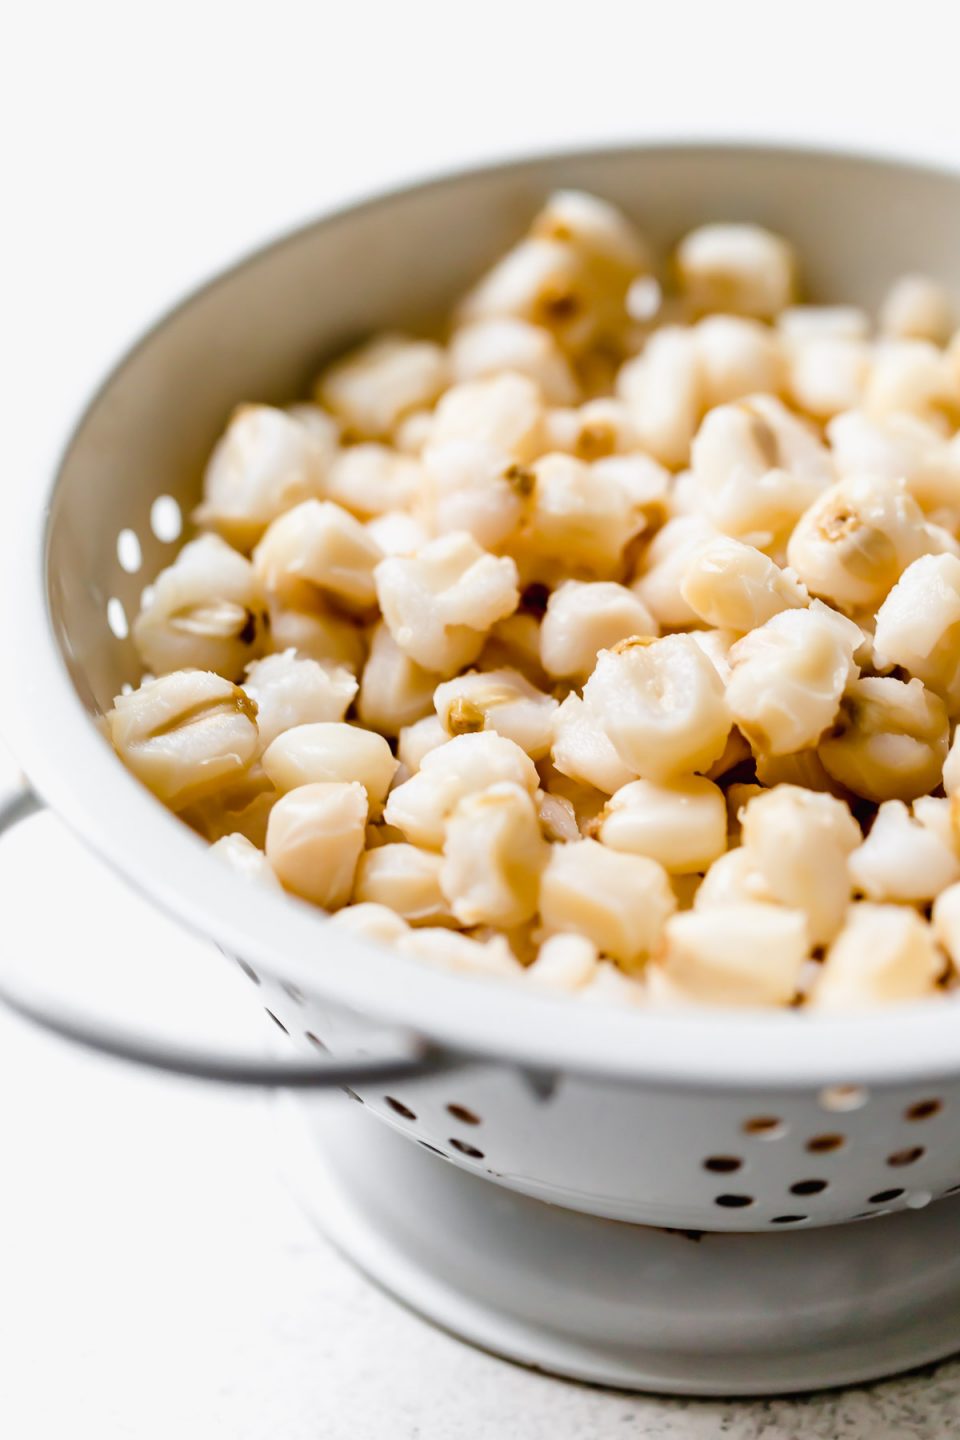 Hominy, sitting in a small white colander.